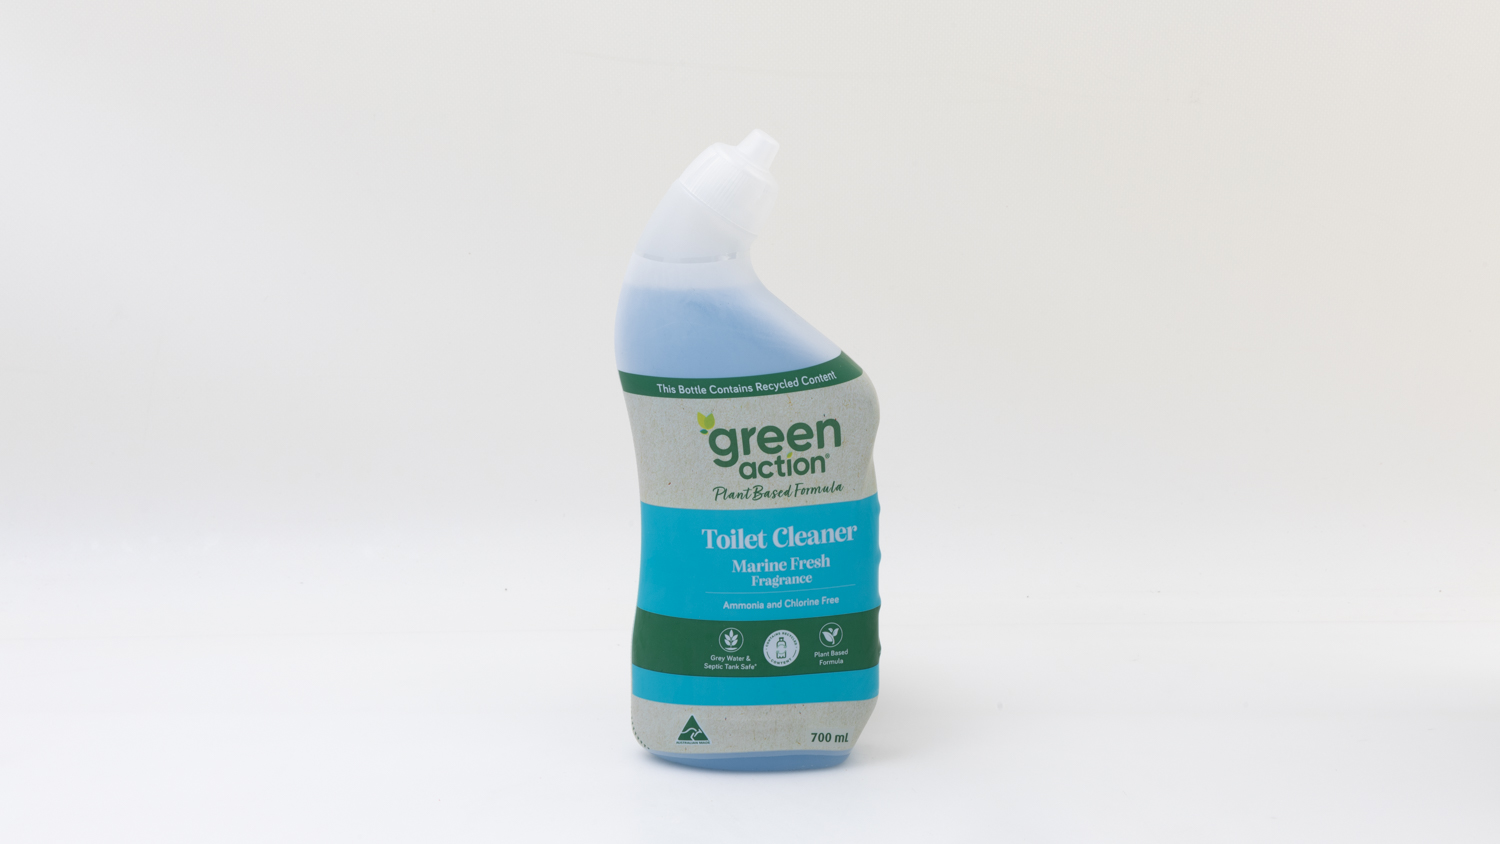 Aldi Green Action Toilet Cleaner carousel image